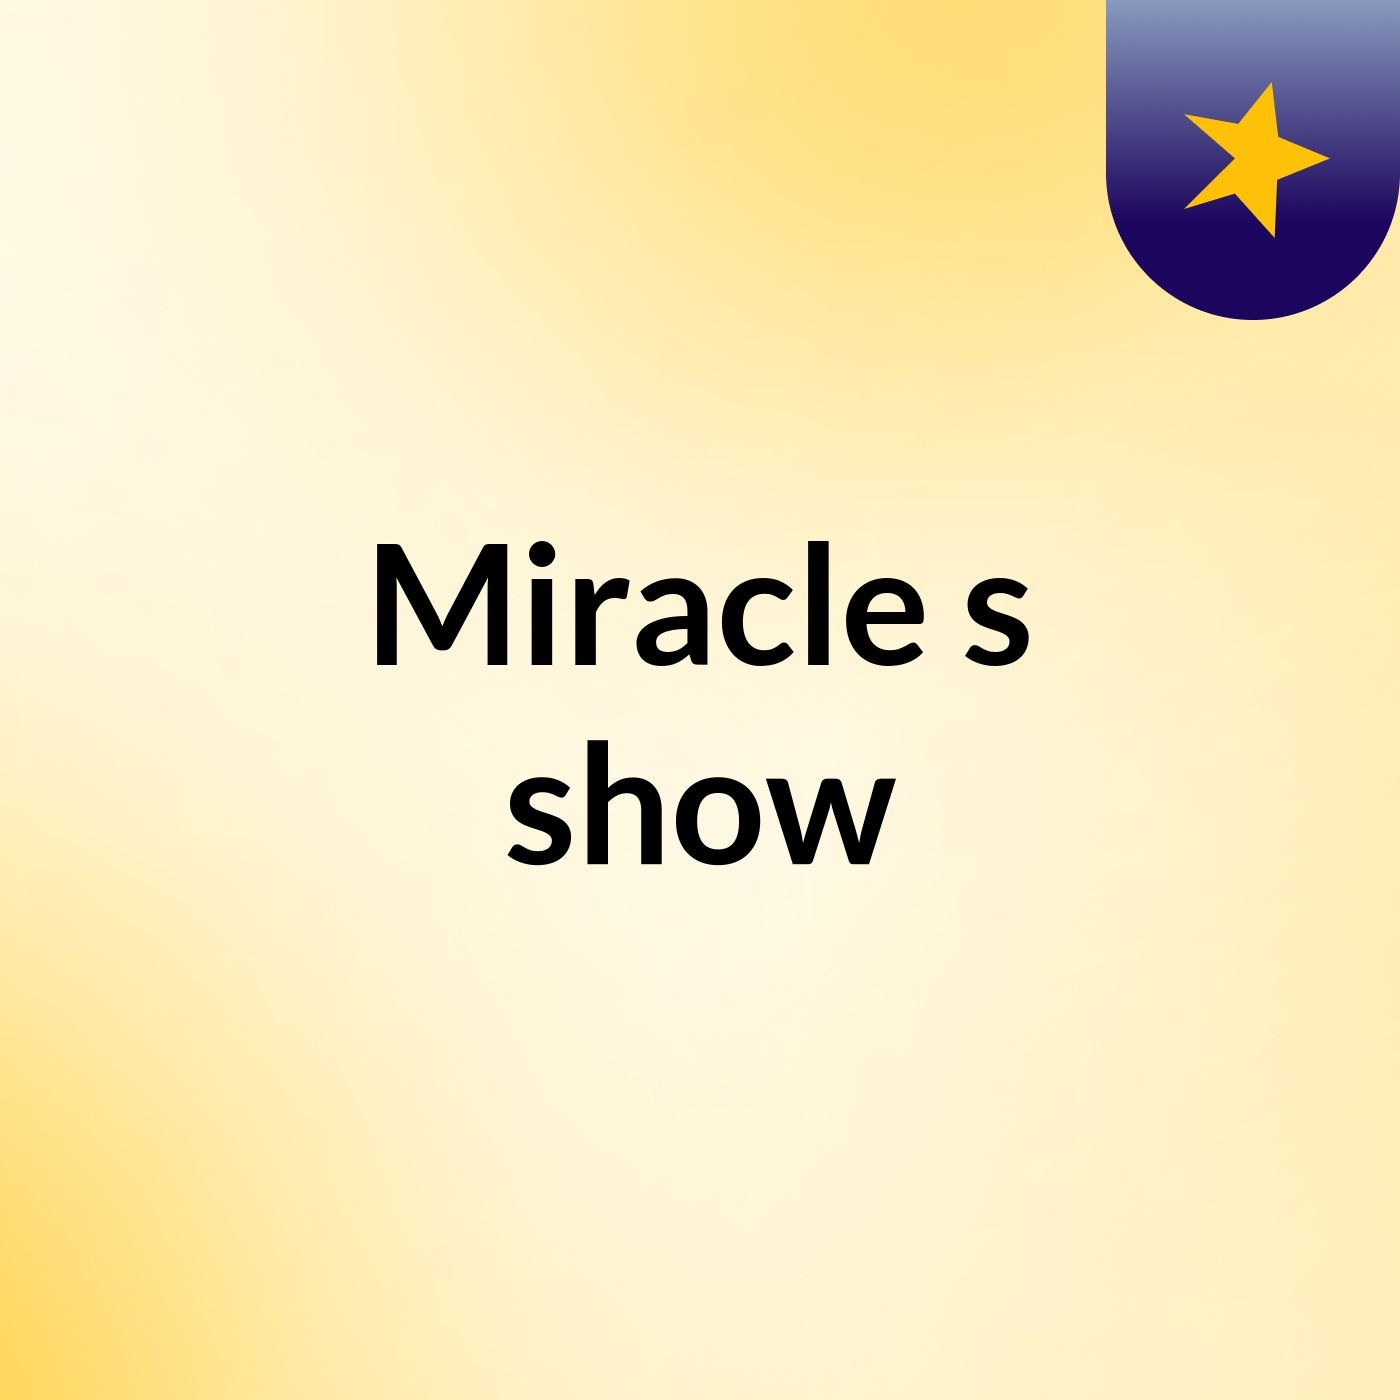 Miracle's show